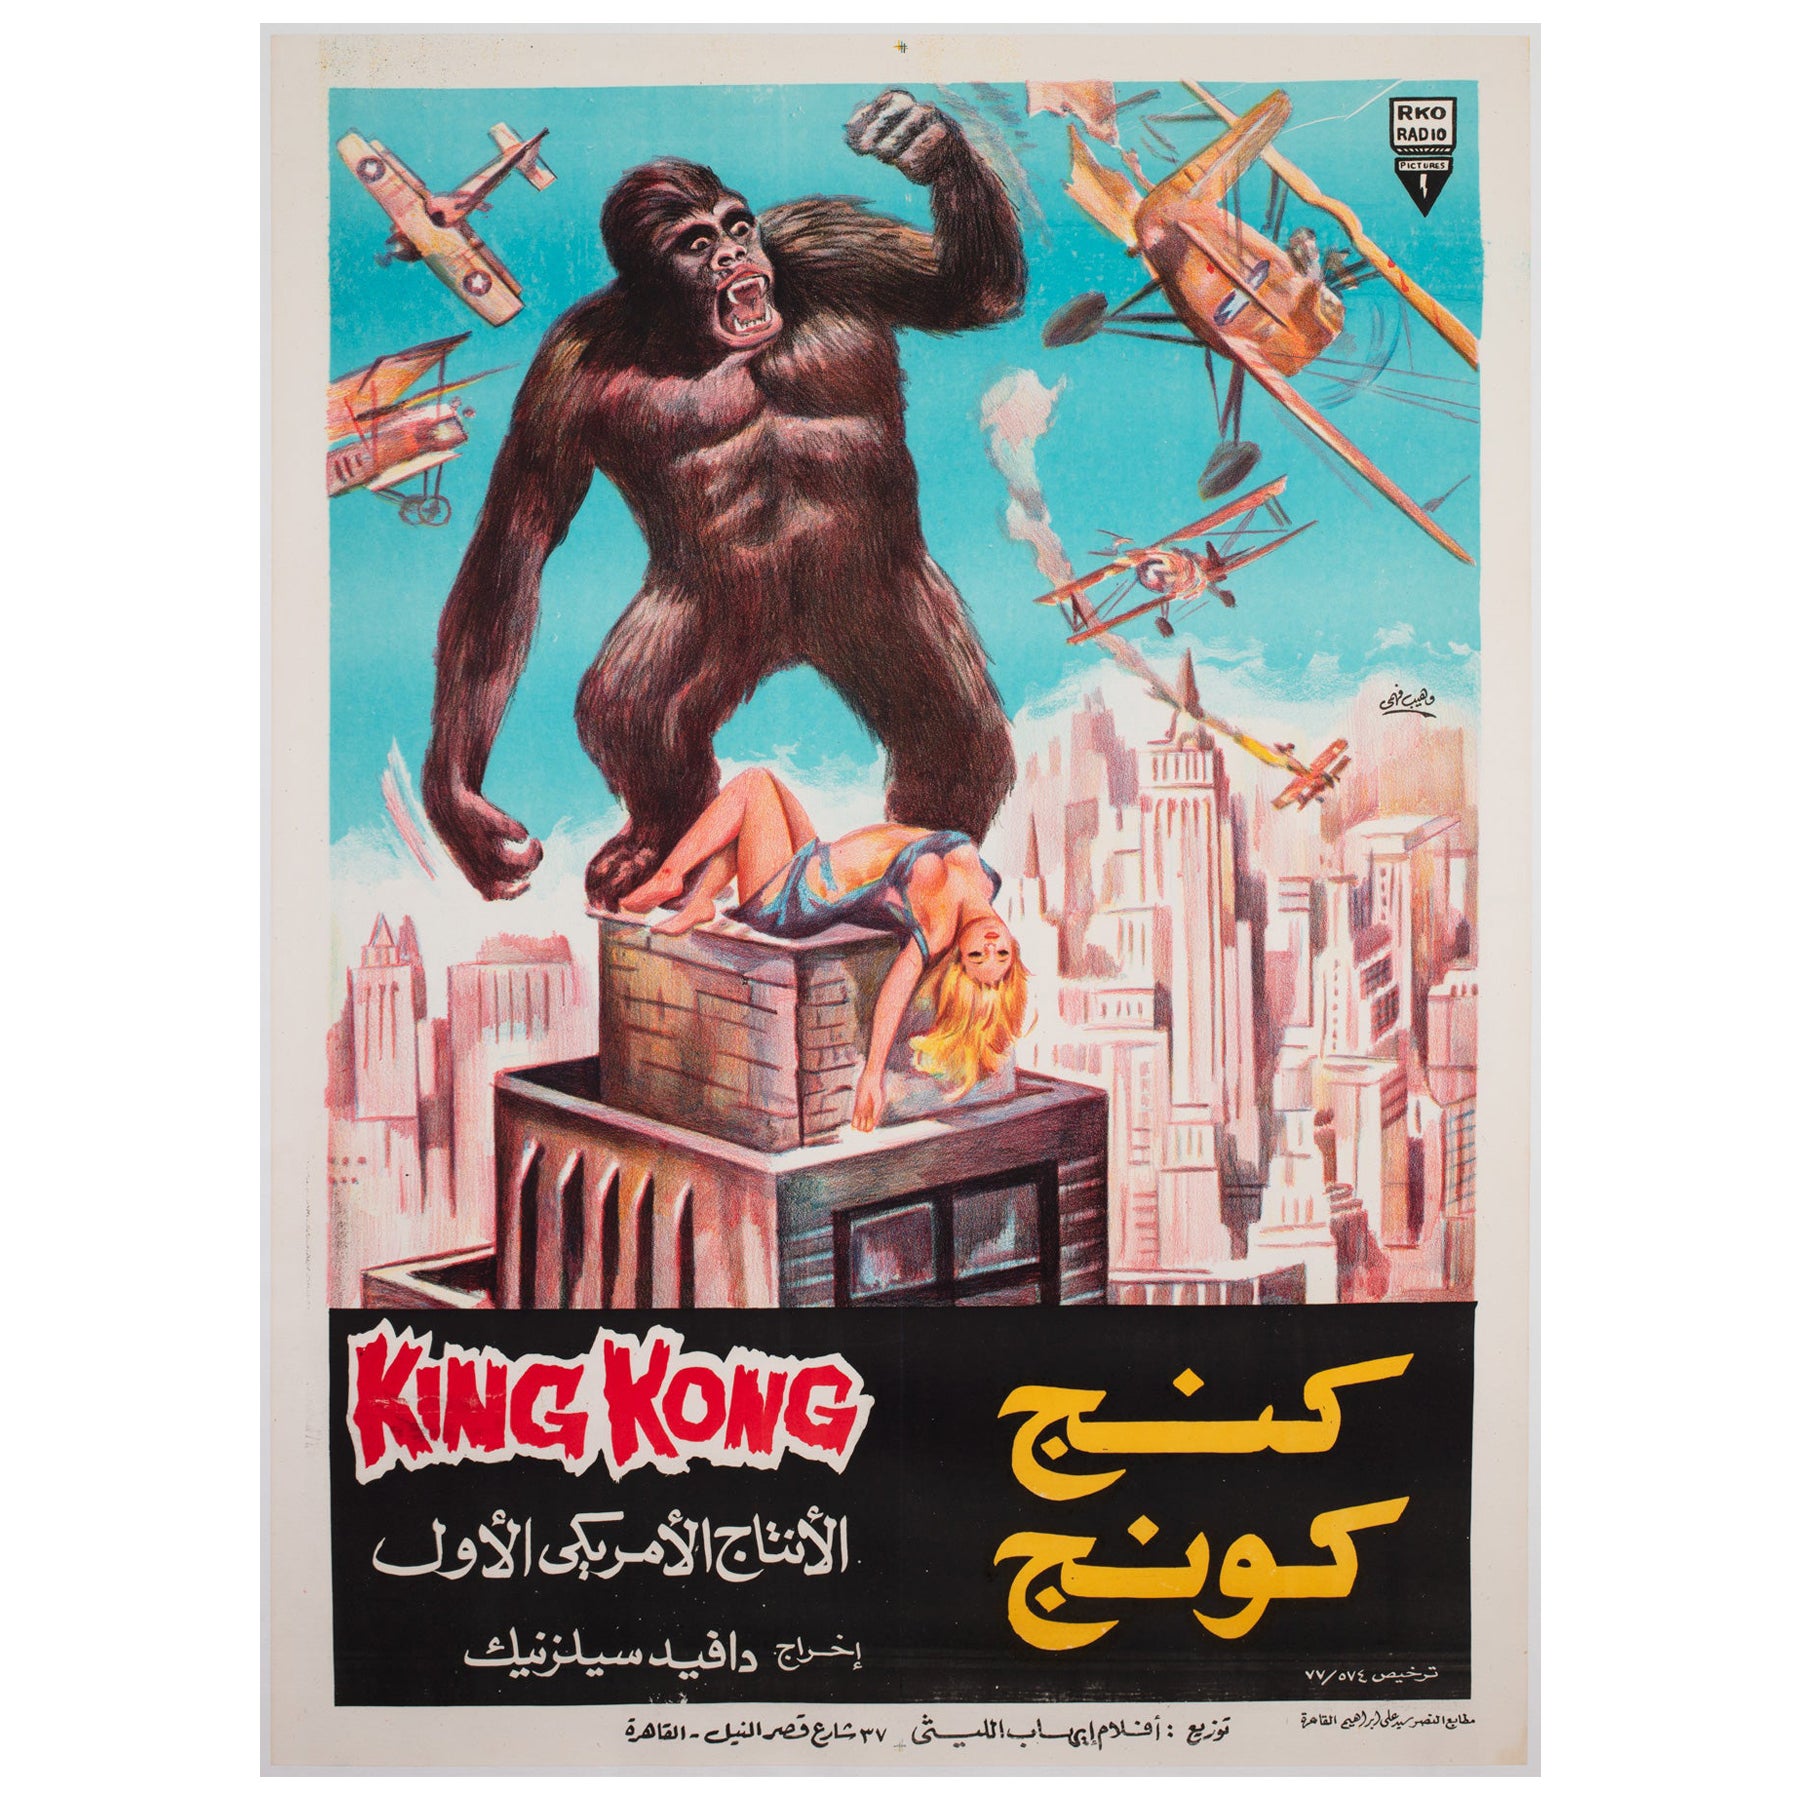 "King Kong", R1977 Egyptian Film Movie Poster, Fahmy